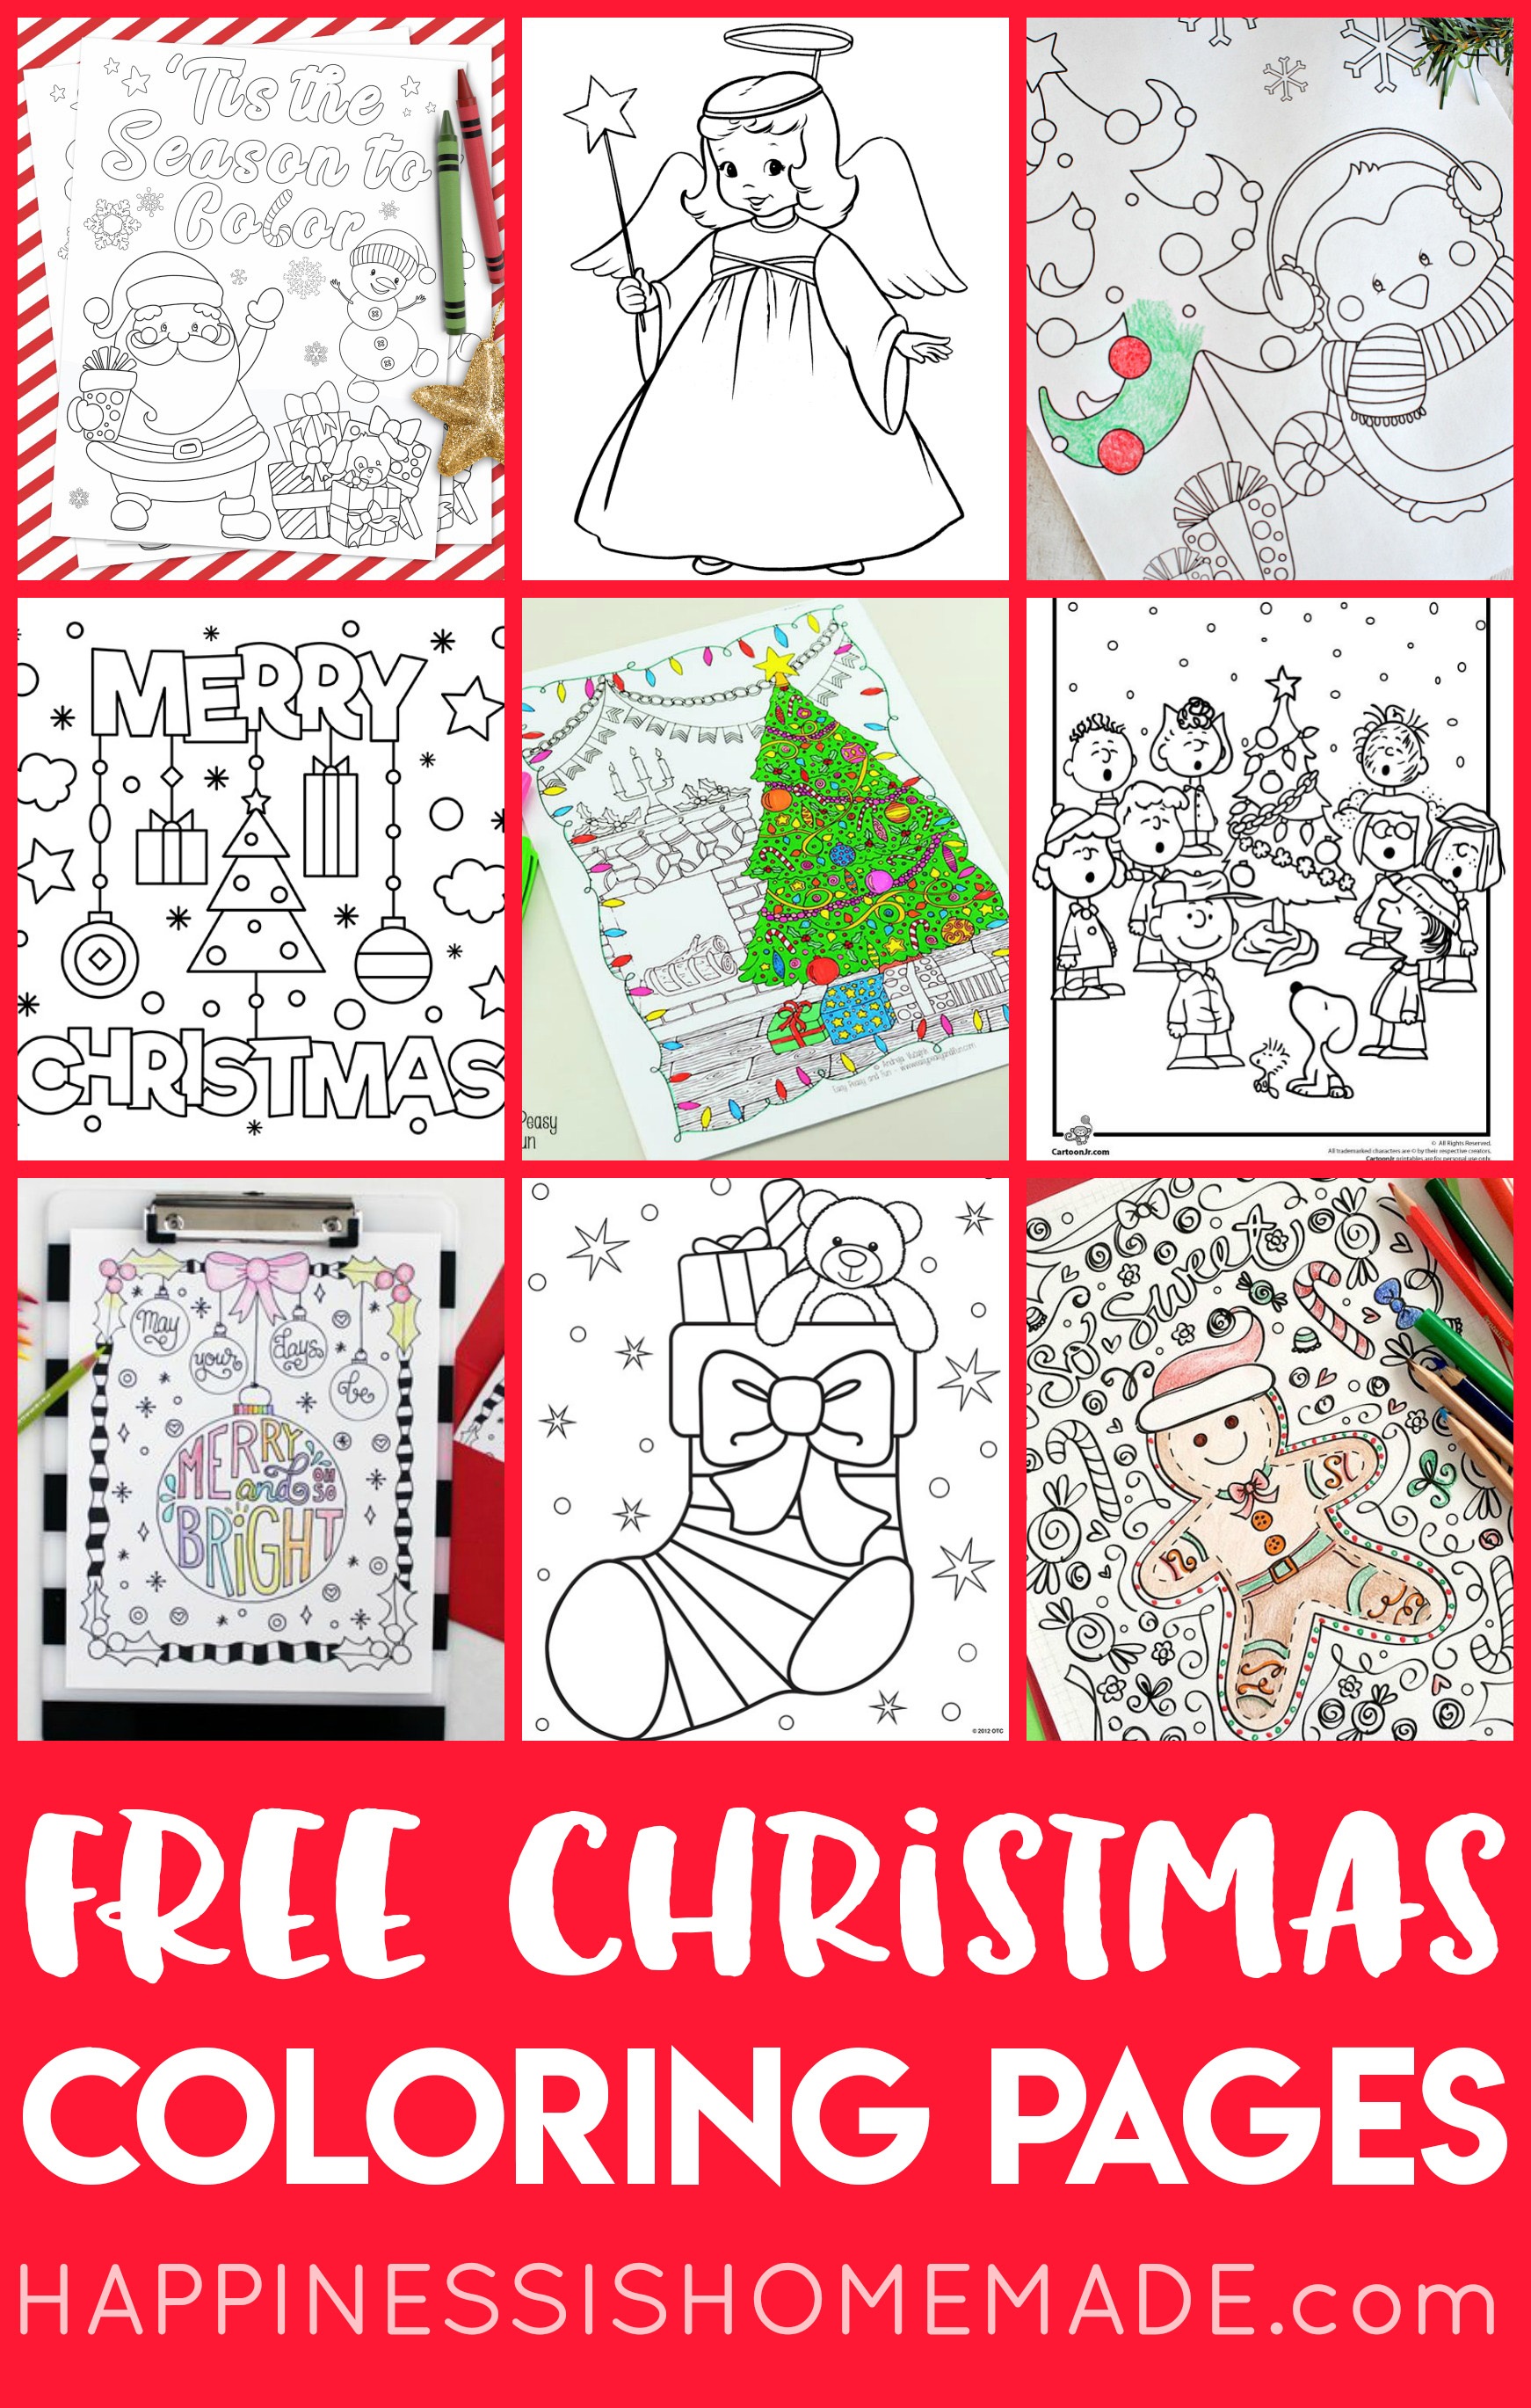 Free Christmas Coloring Pages For Adults And Kids - Happiness Is - Free Printable Christmas Coloring Pages And Activities